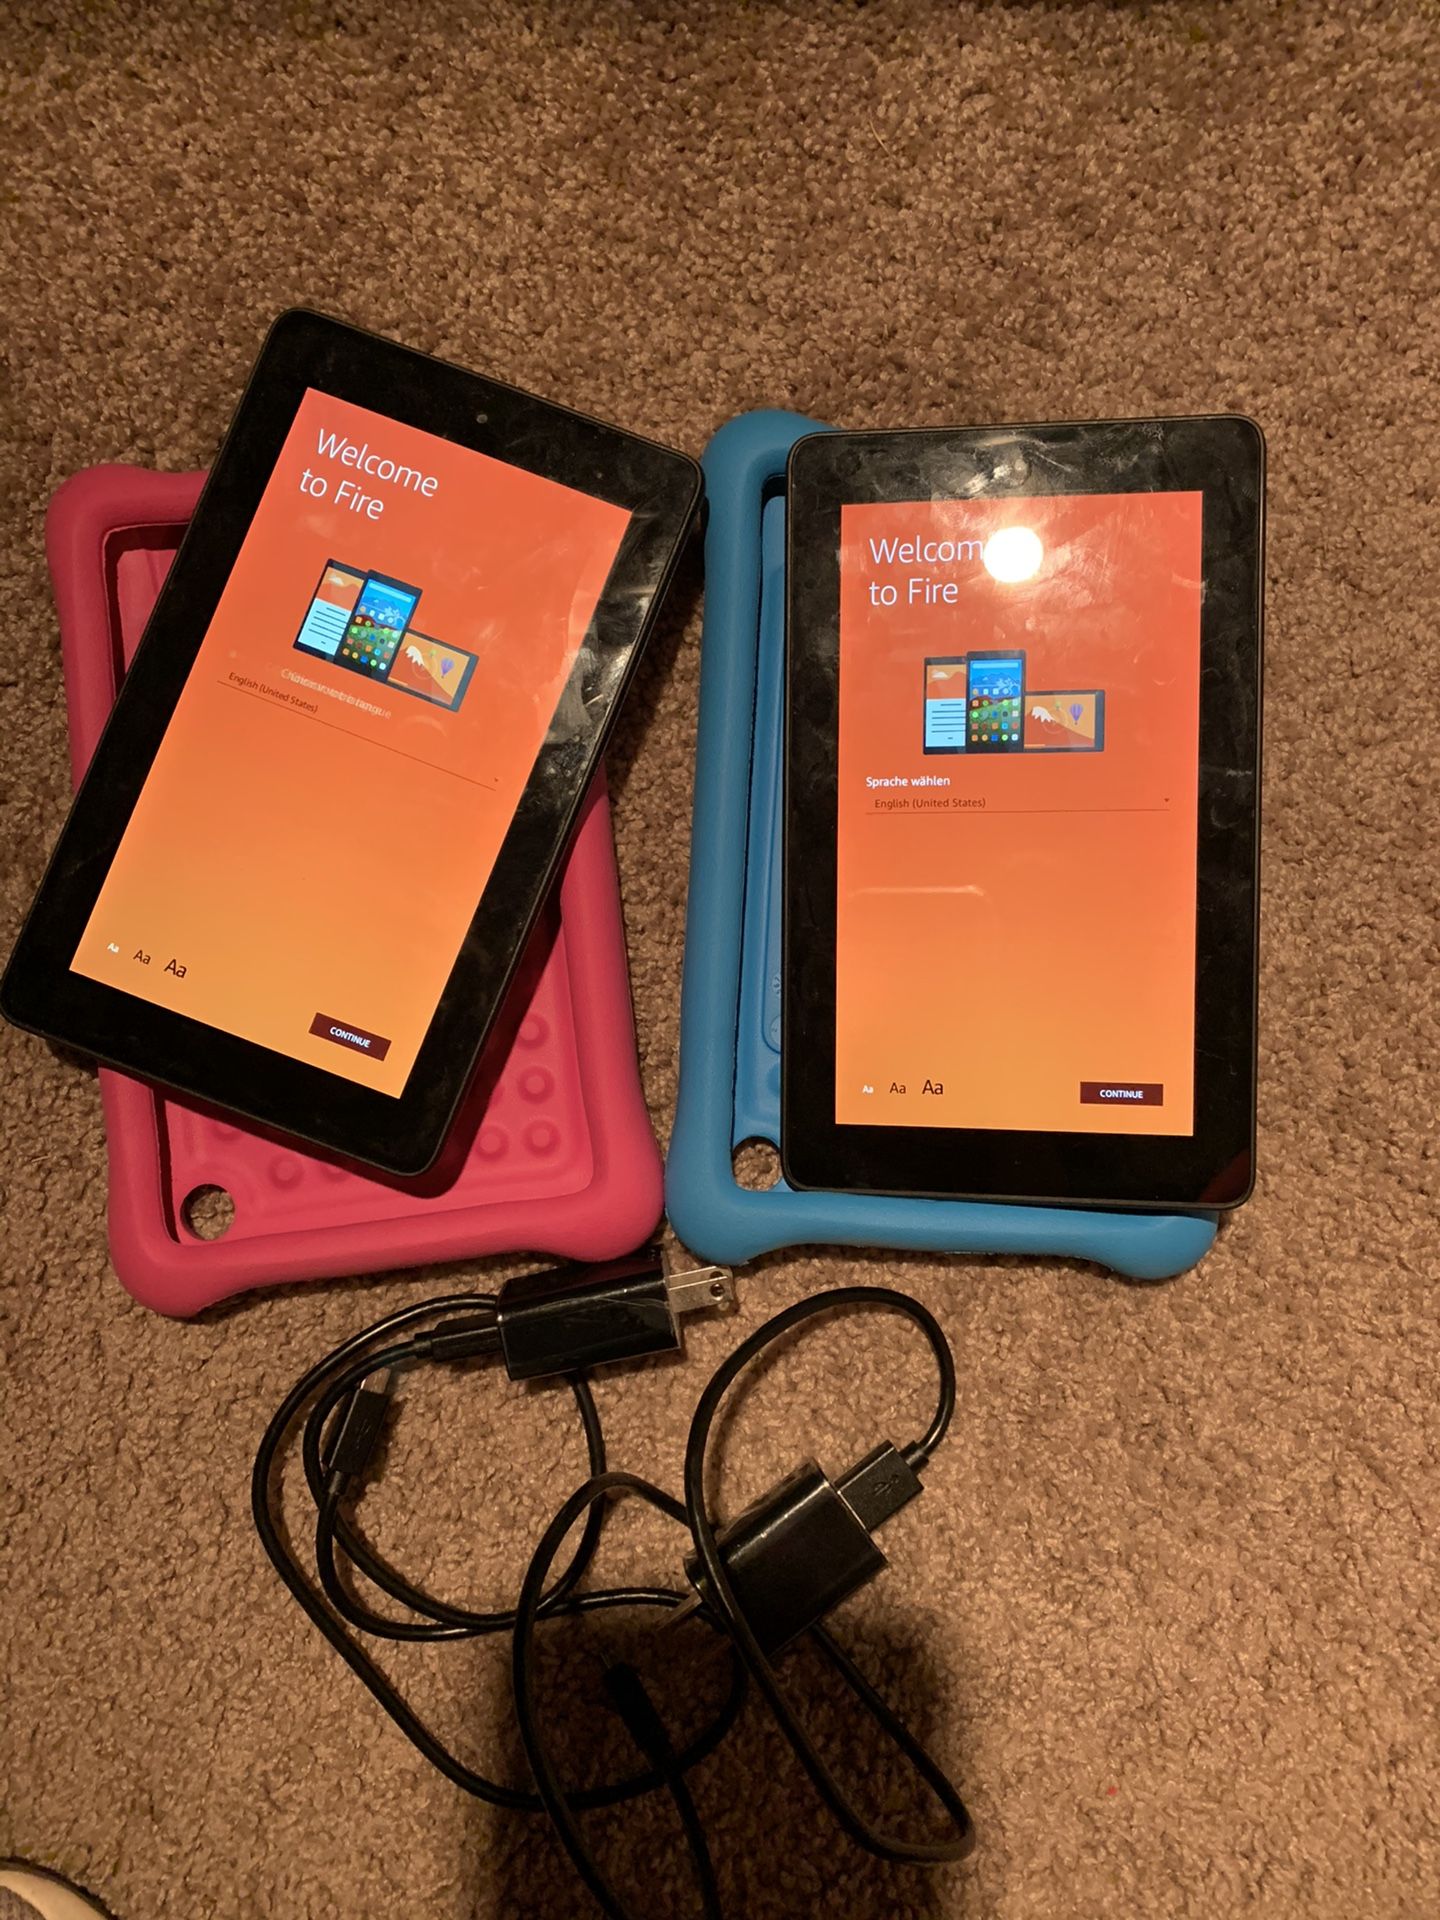 2 Amazon Fire tablets with case (1 blue & 1 pink) and 2 chargers